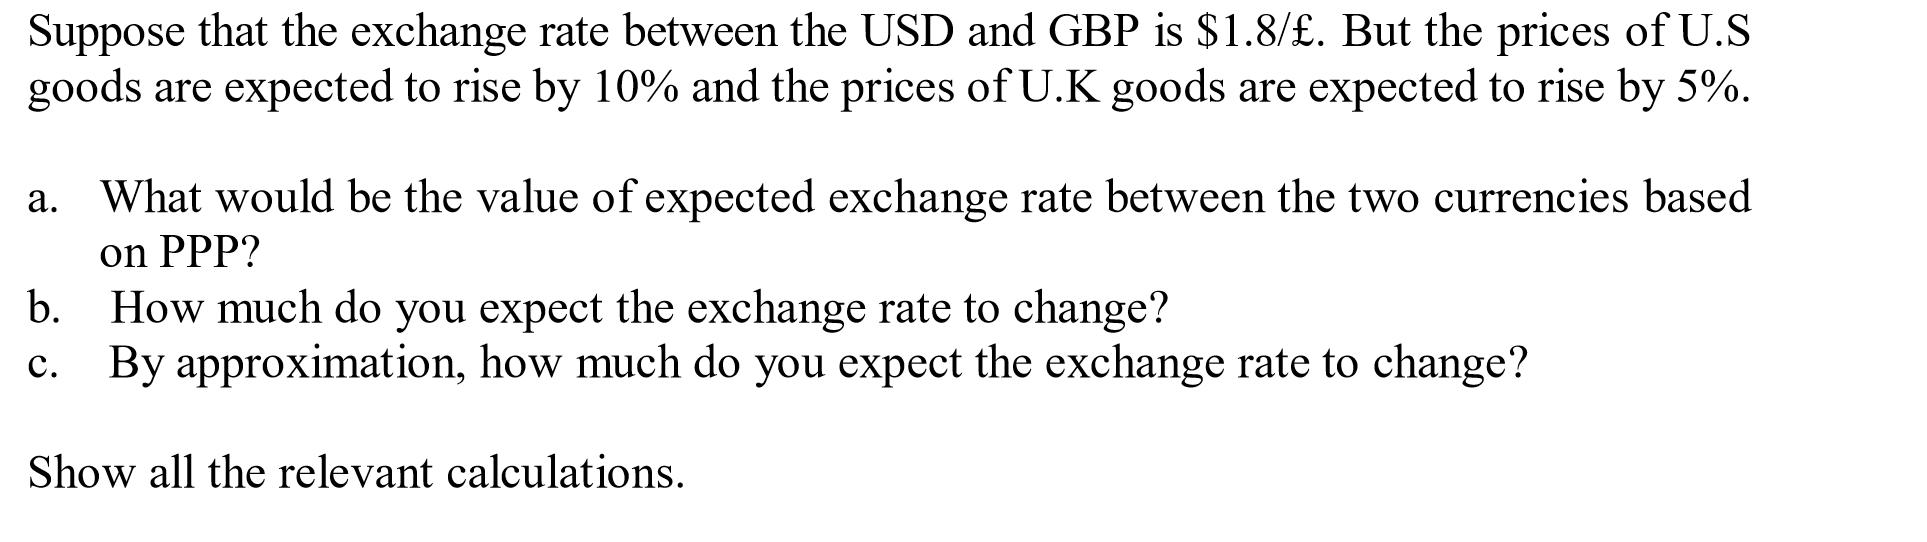 Suppose that the exchange rate between the USD and GBP is $1.8/£. But the prices of U.Sgoods are expected to rise by 10% and